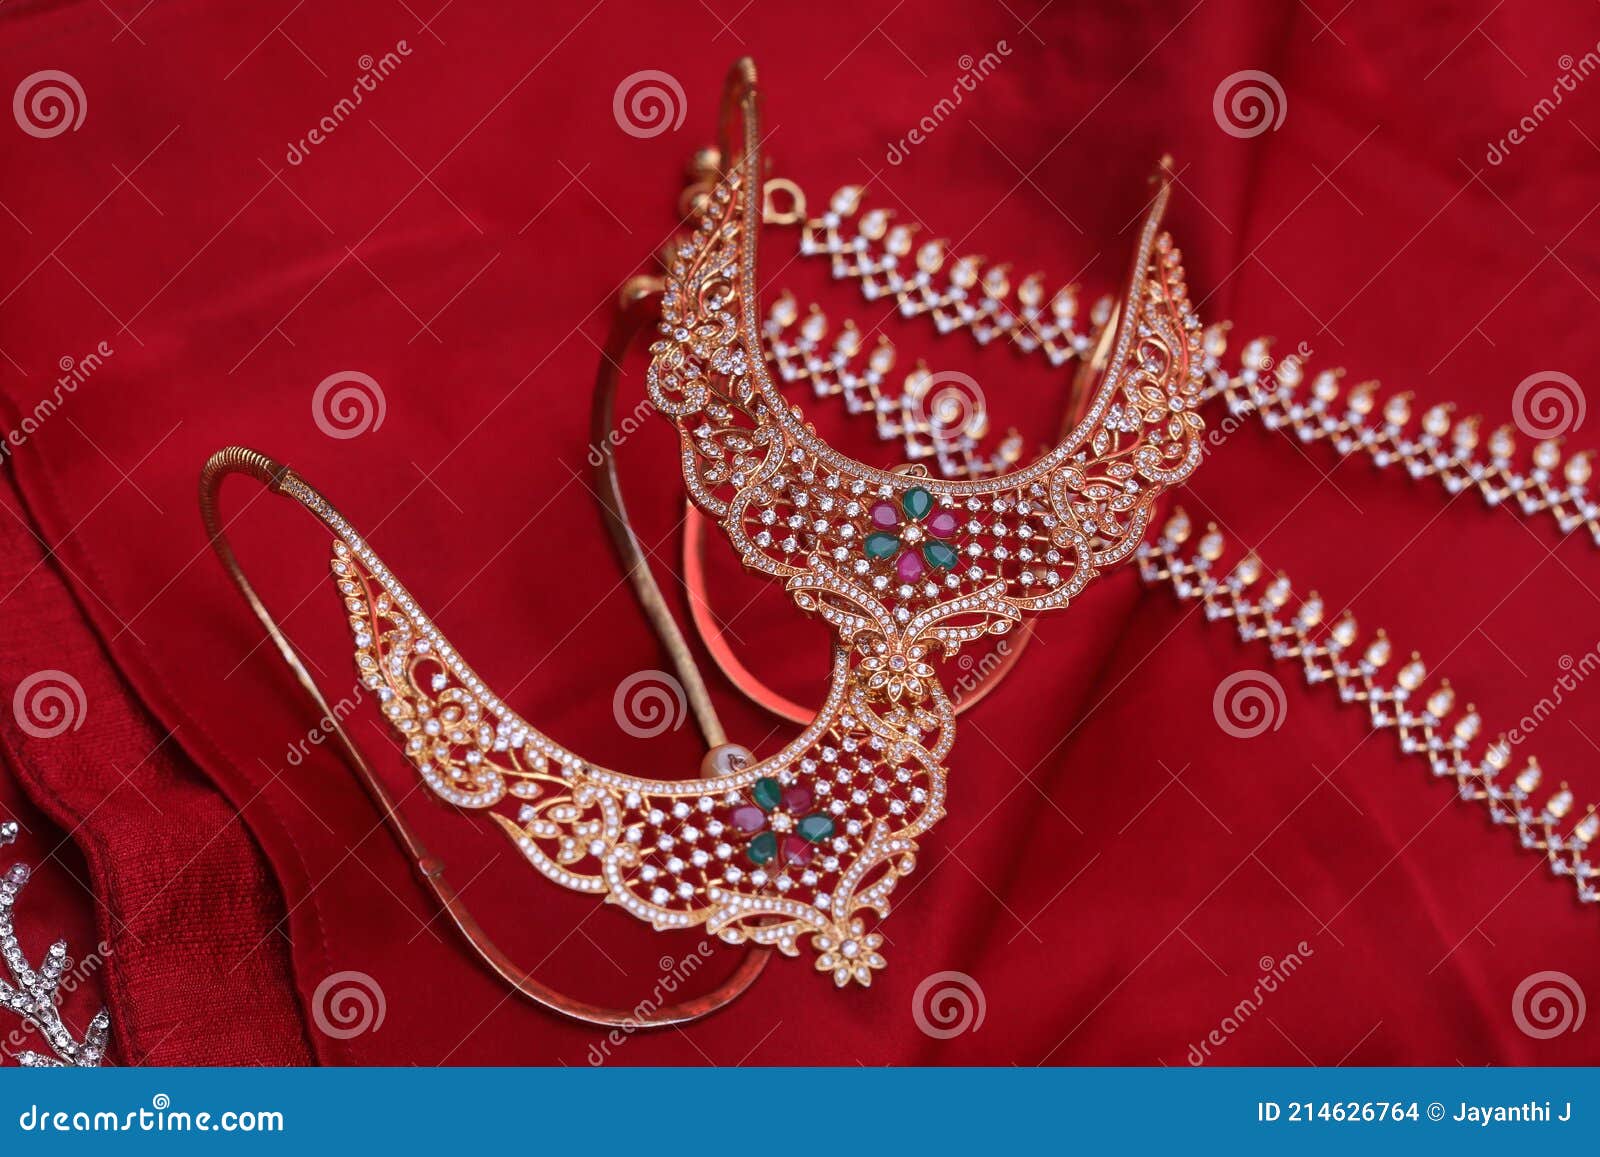 Hand Accessories with Chain in Red Background Stock Photo - Image of ...